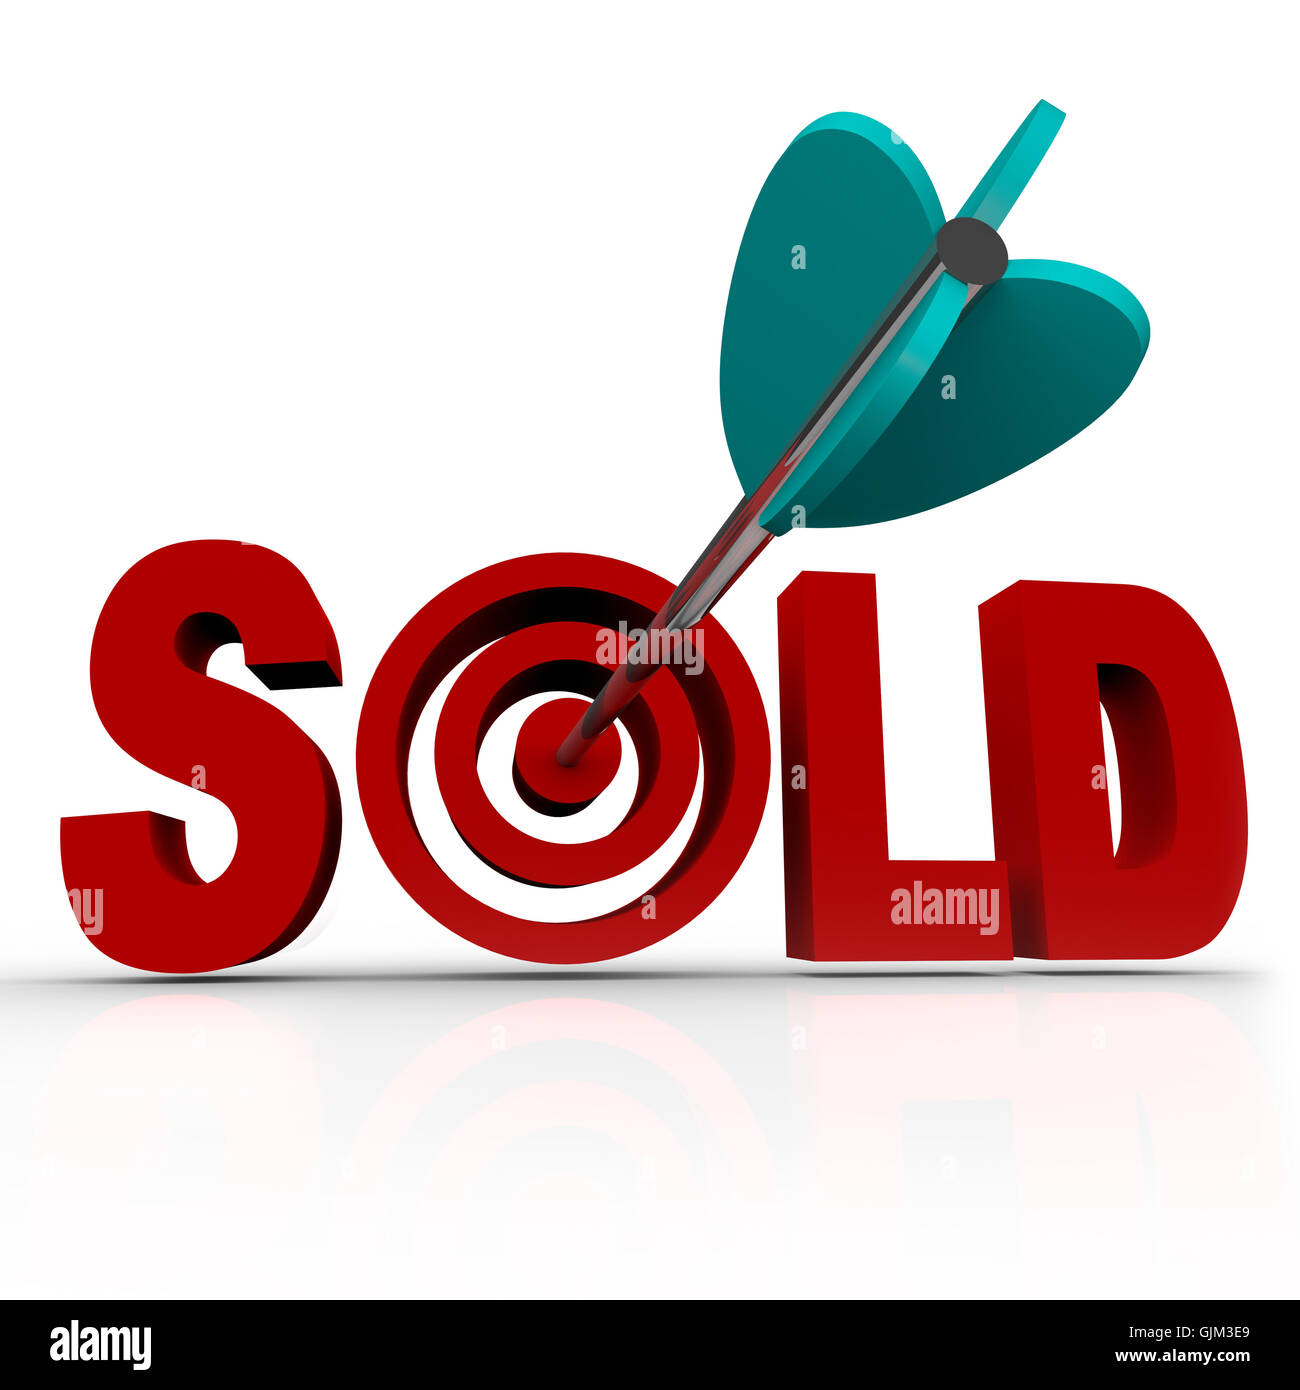 Sold - Arrow in Word Bullseye - Done Deal Transaction Stock Photo